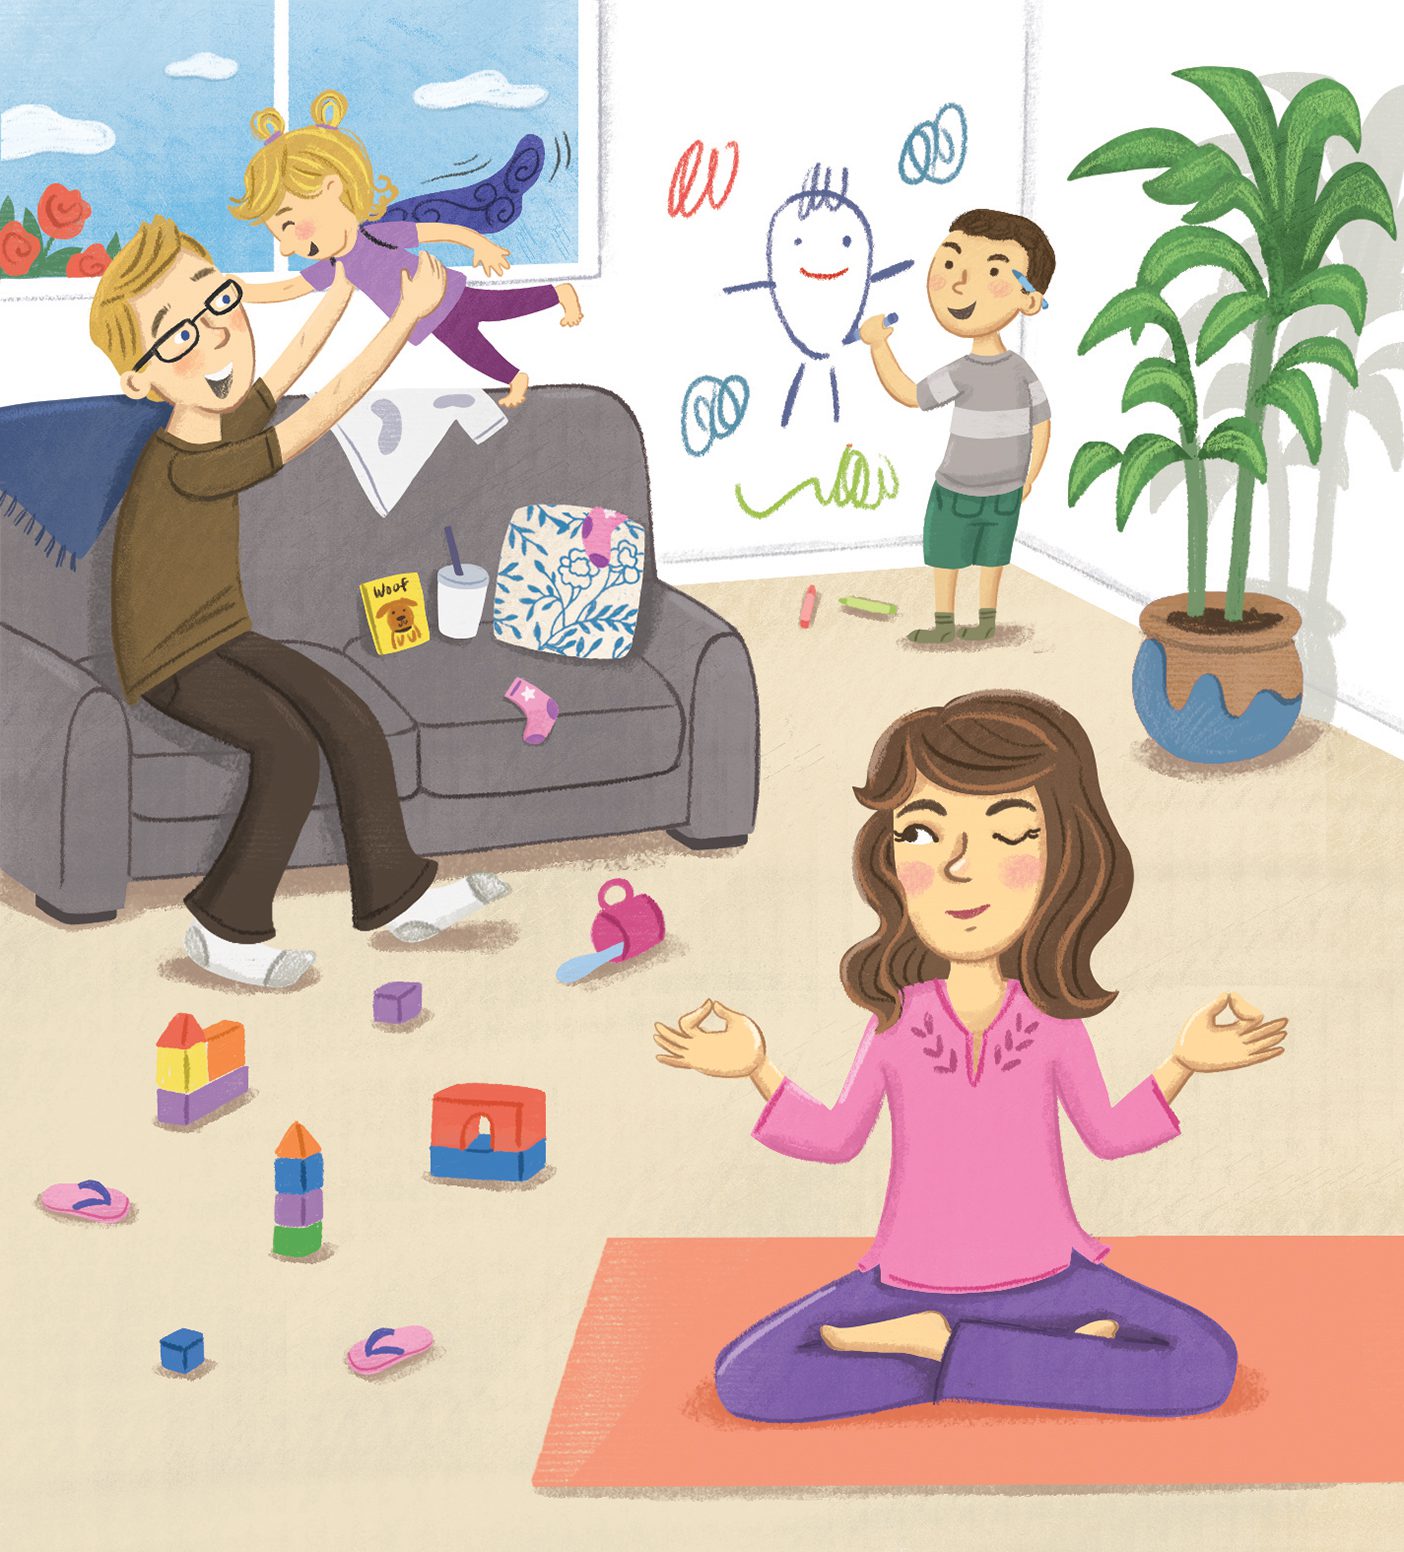 Illustration of a mother doing yoga while a father plays with children